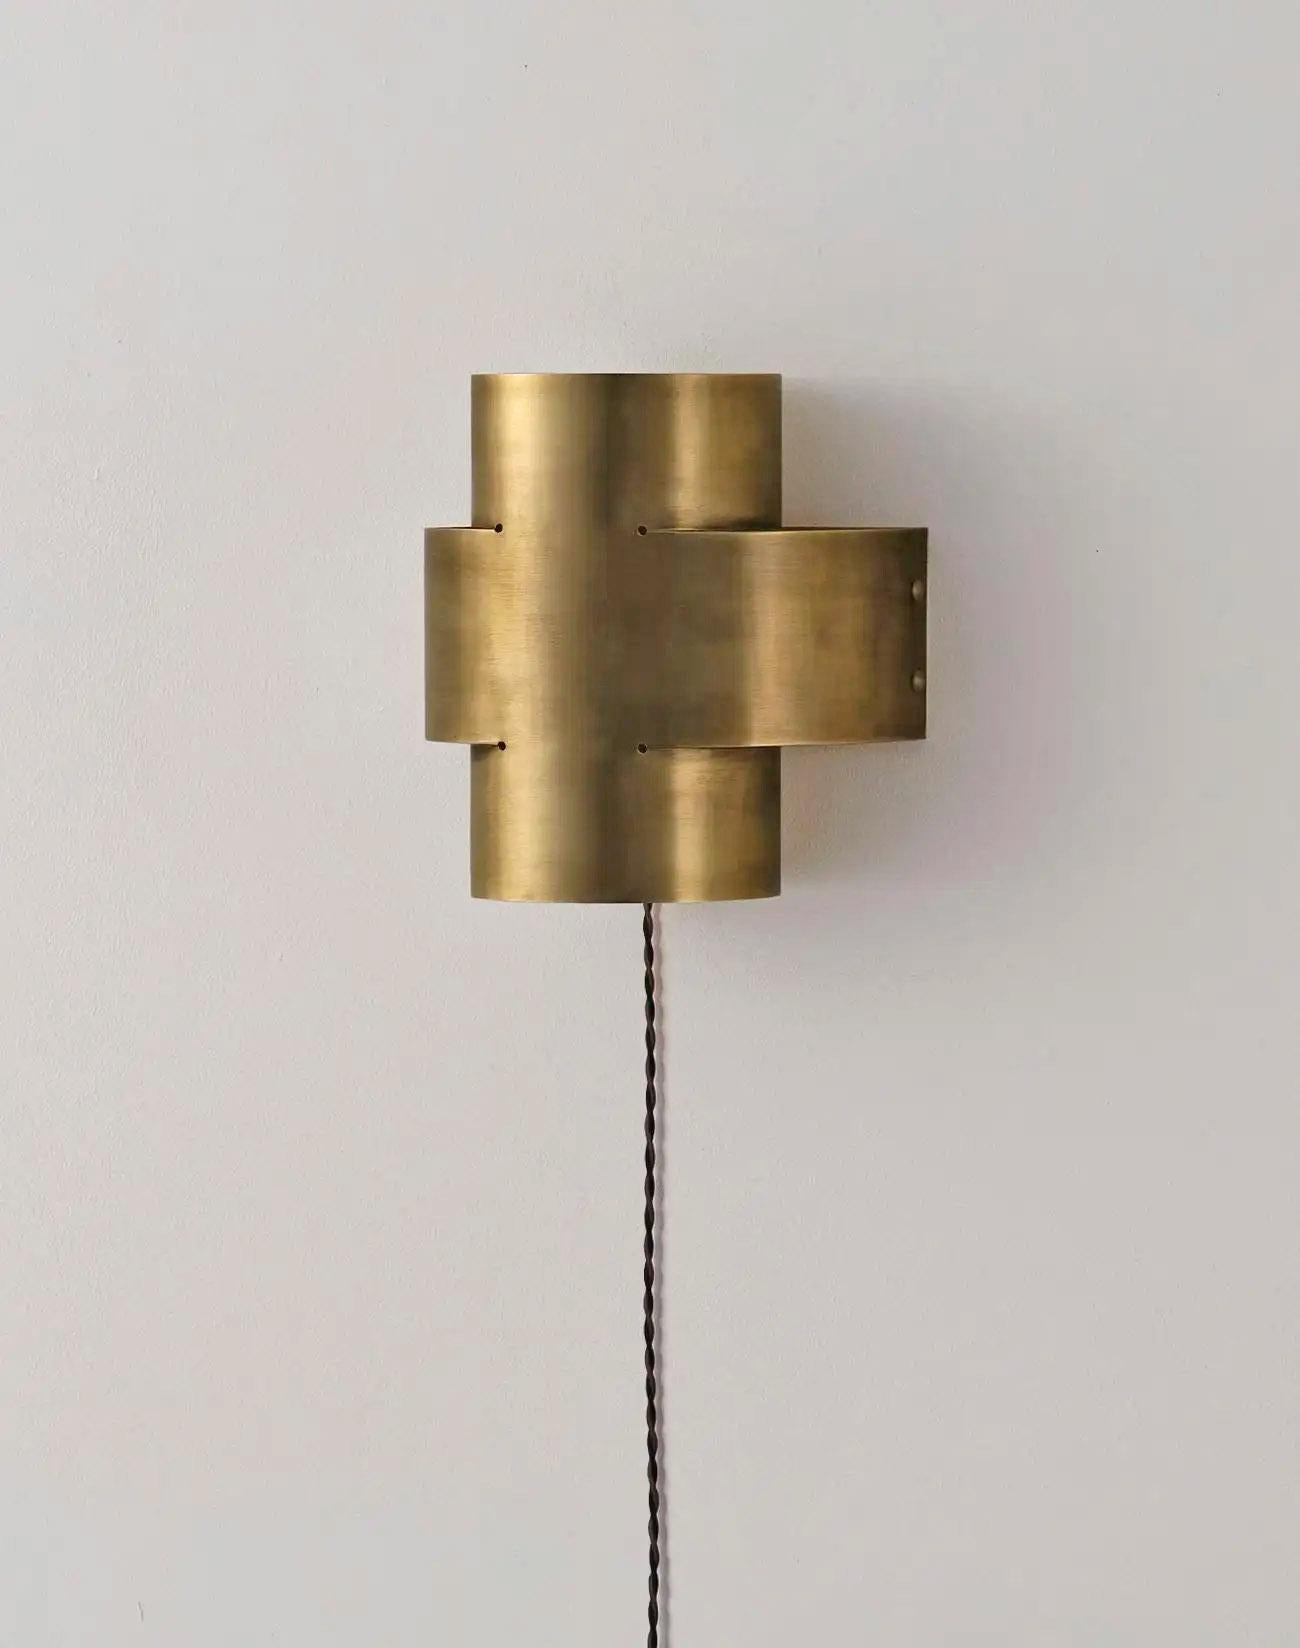 Contemporary Aged Brass Wall Hanging Applique, Plus One Large by Paul Matter

PLUS Series is a new range of appliqués by Paul Matter that feature a simple shape in singular and repetitive arrangements. A 3-Dimensional plus is formed out of a single